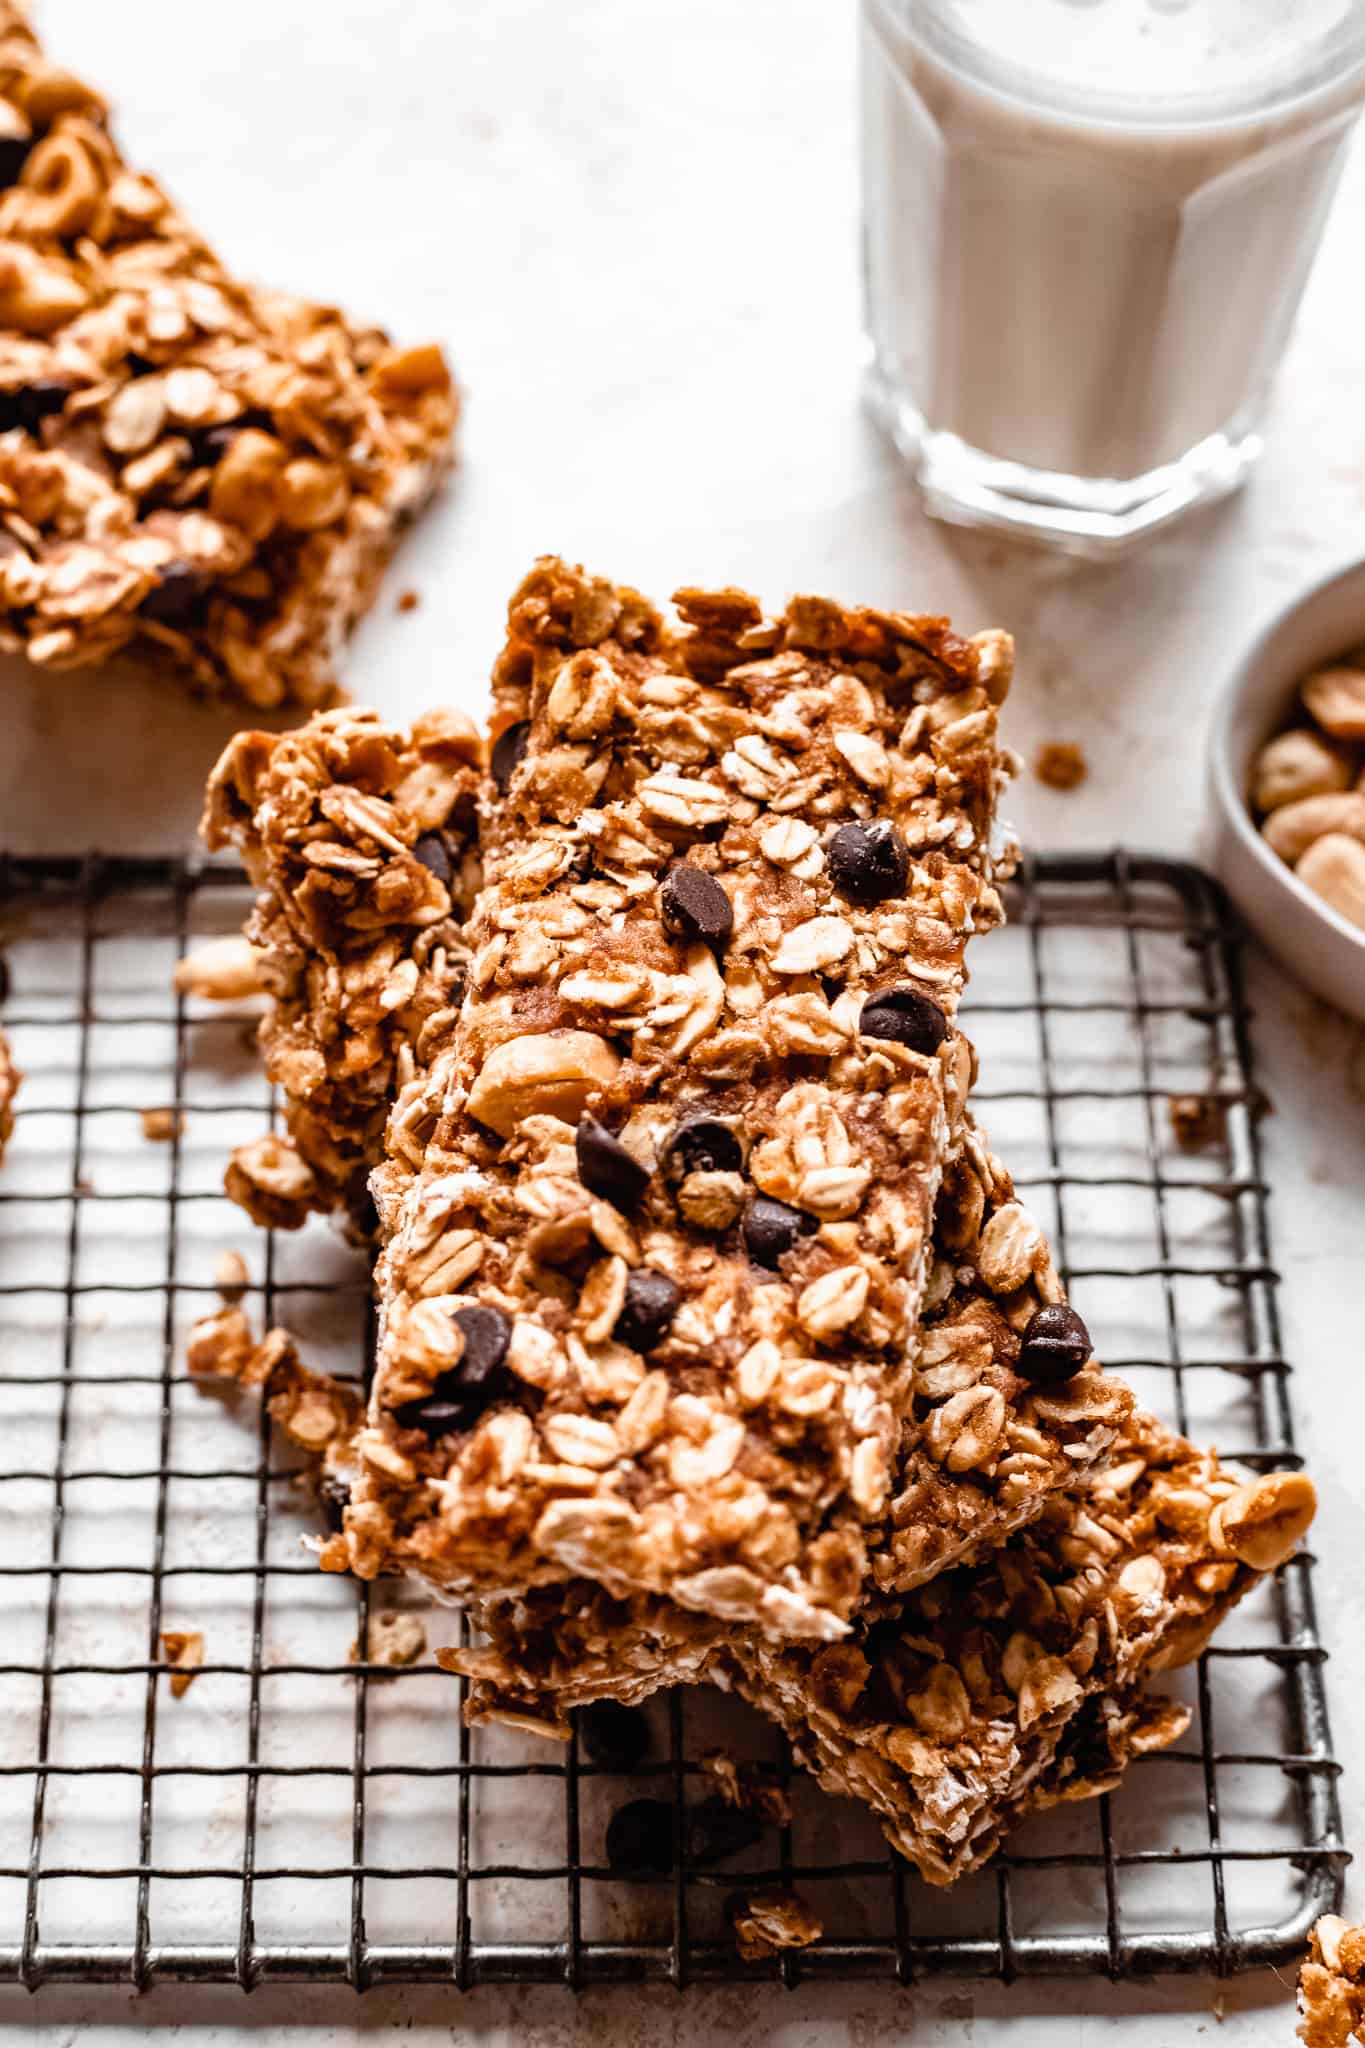 You are currently viewing HOMEMADE GRANOLA BARS RECIPE